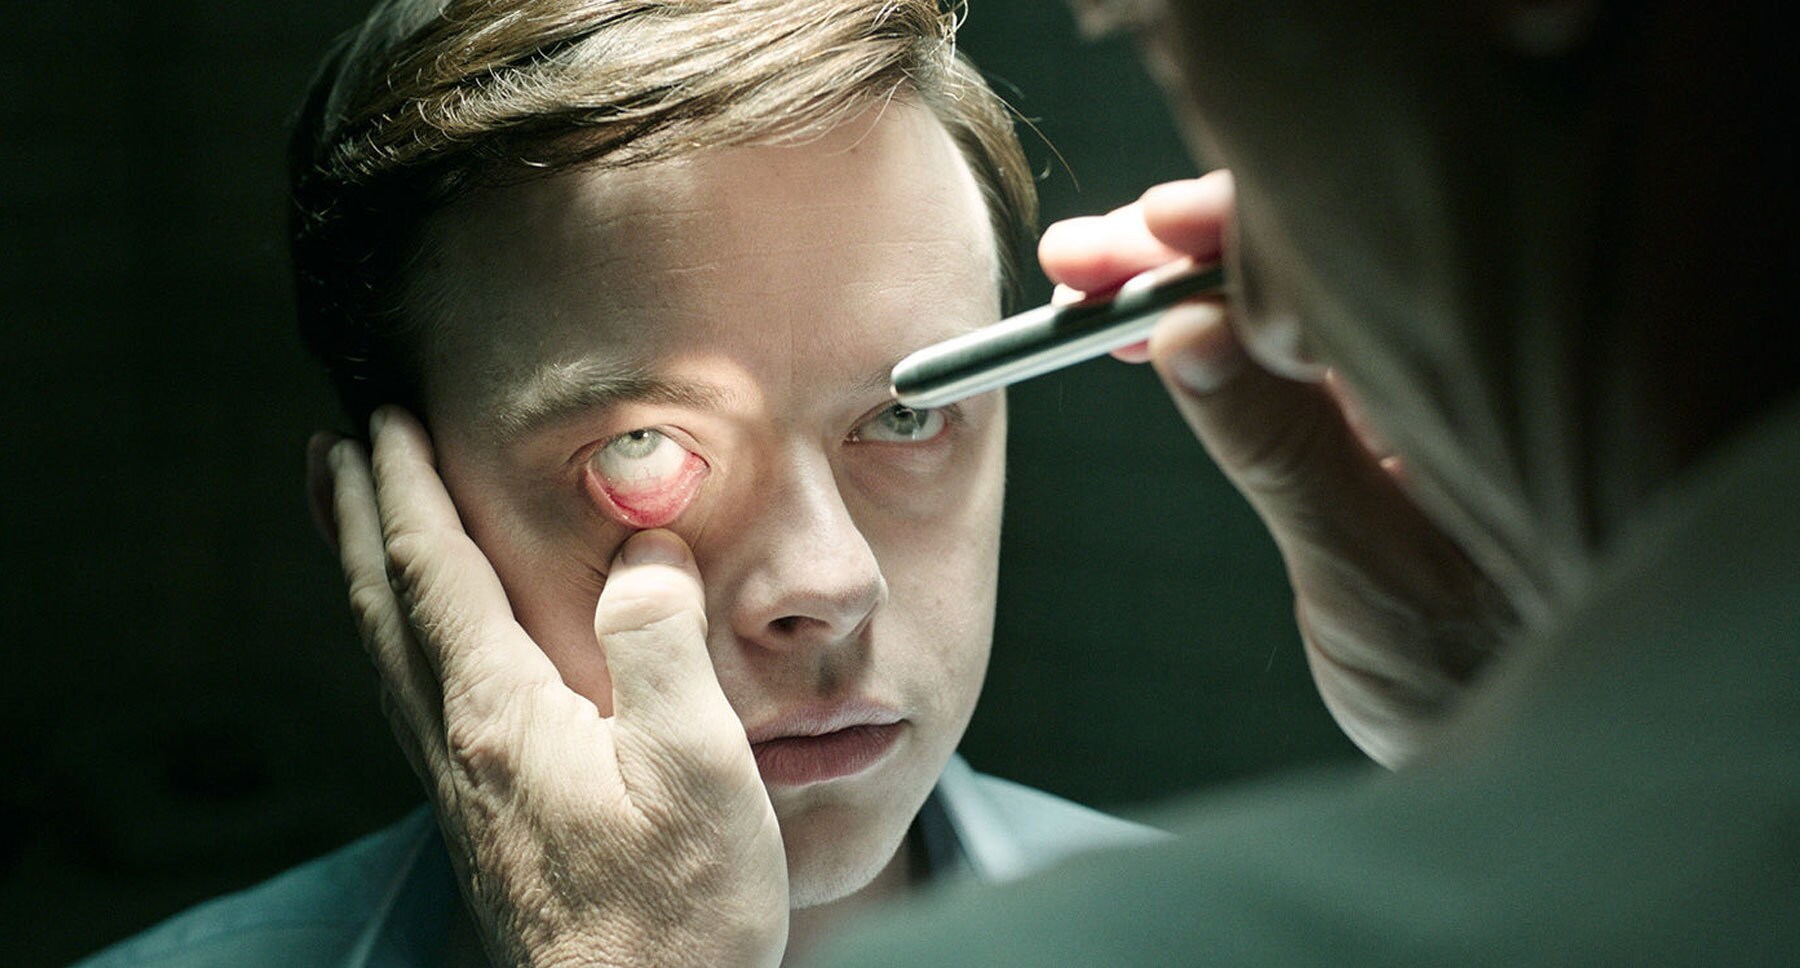 Actor Jason Isaacs (Volmer) examines Actor Dane DeHaan (Lockhart) eyes in the film "A Cure for Wellness"